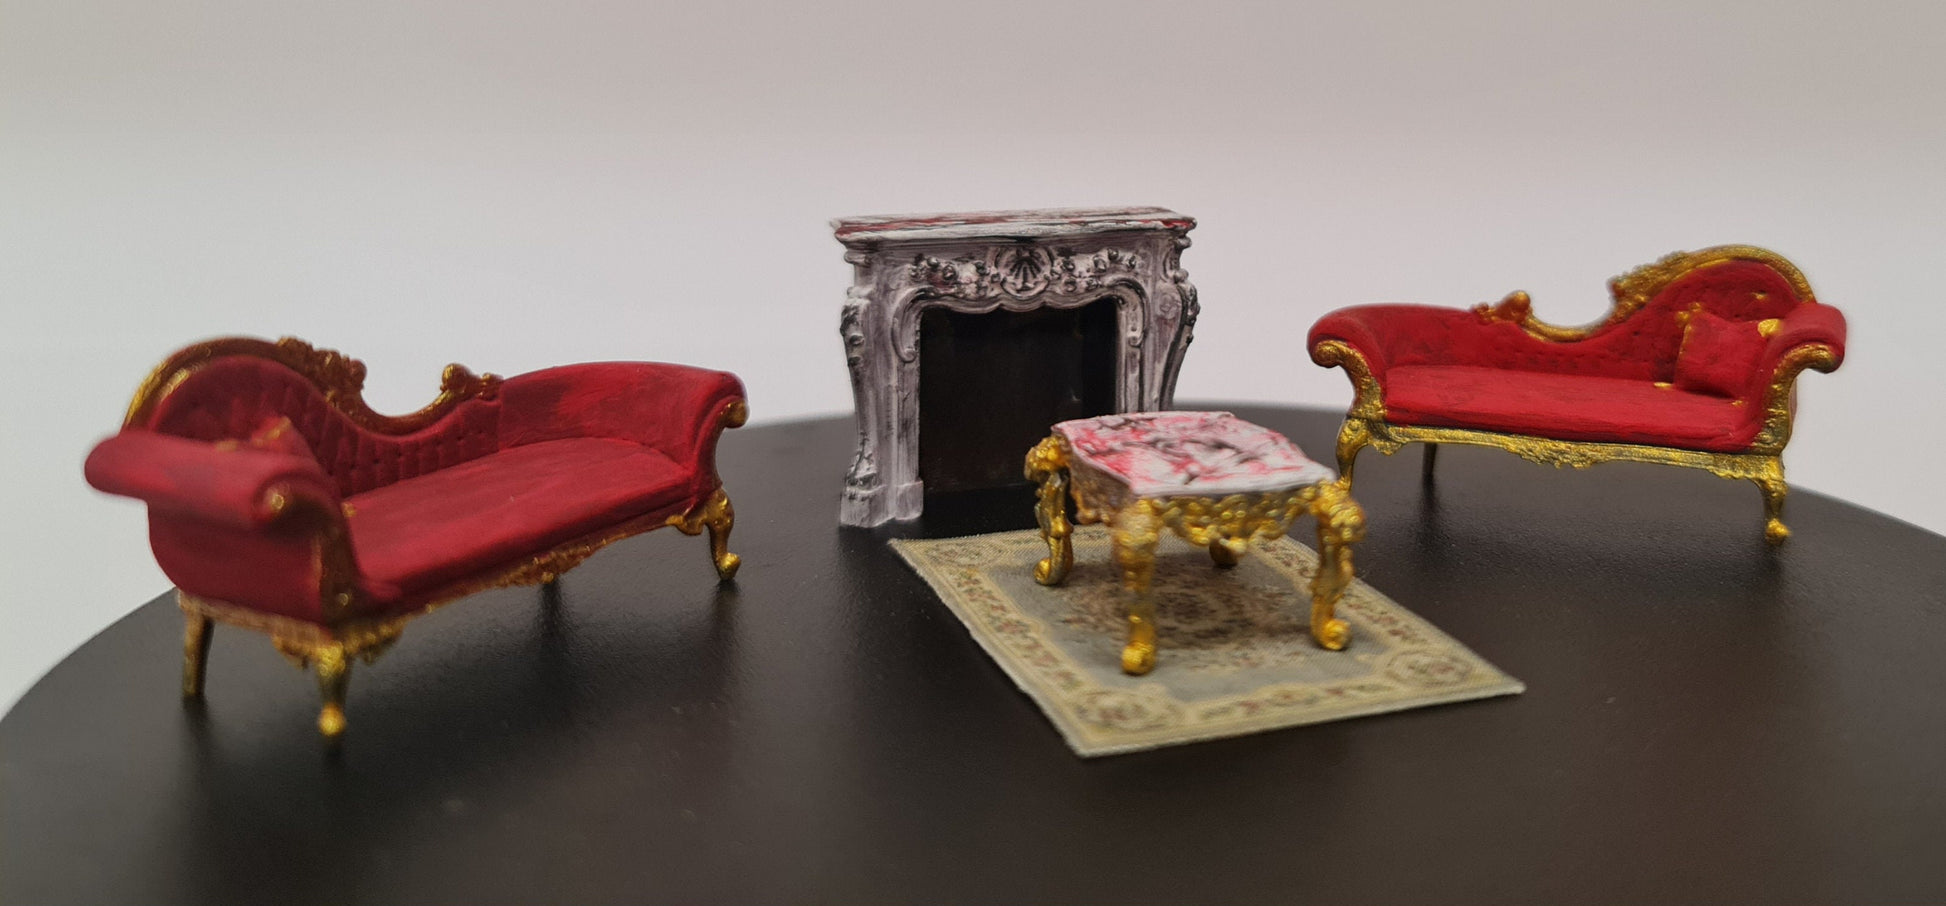 Baroque Furniture Set 3D printed in 1;48th scale